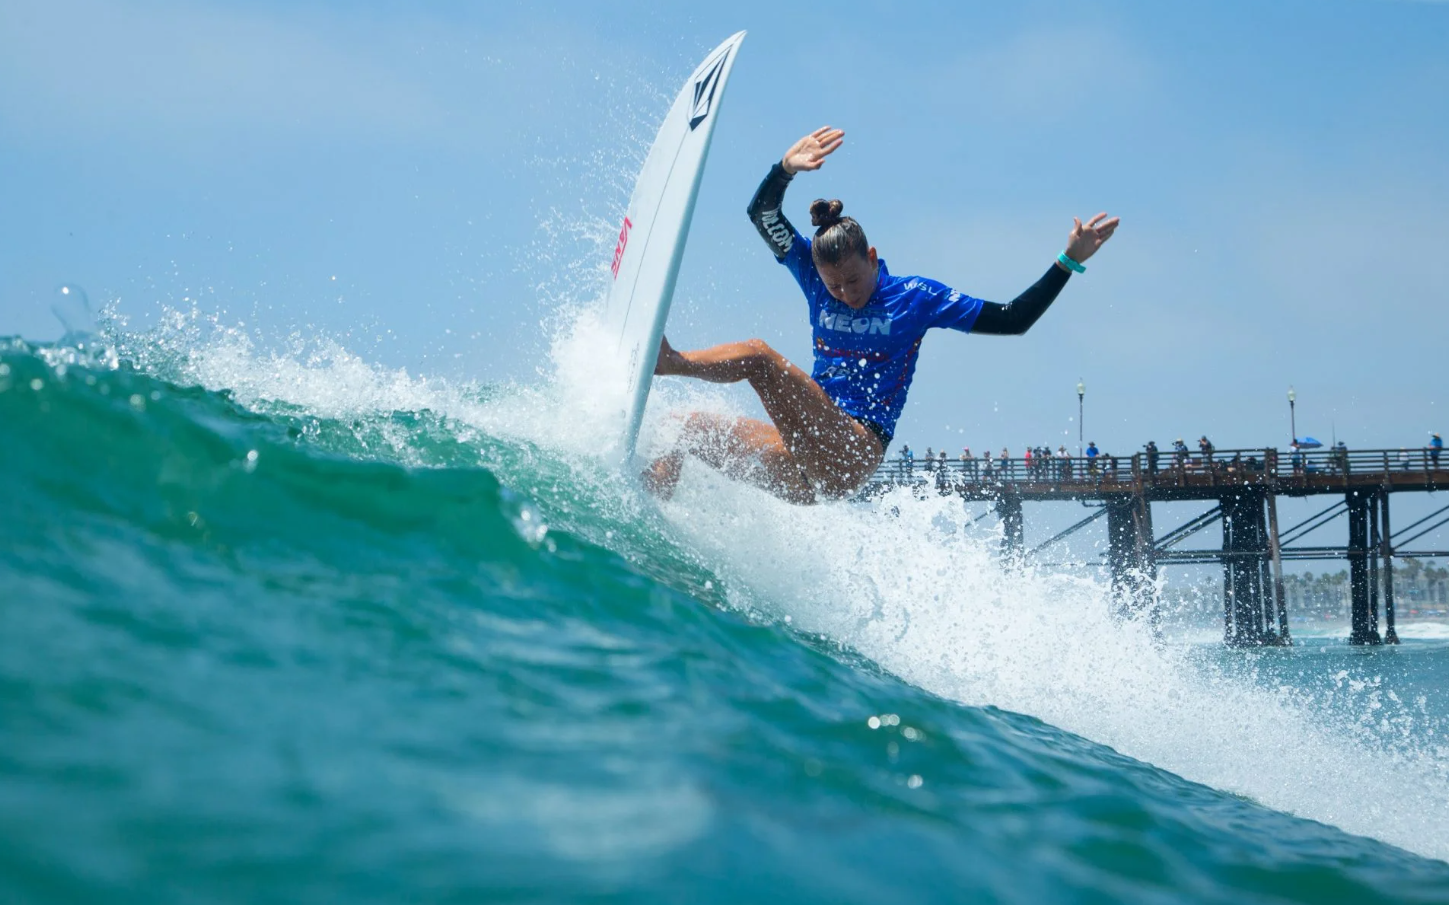 Super Girl Surf Pro competition starts today in Jax Beach